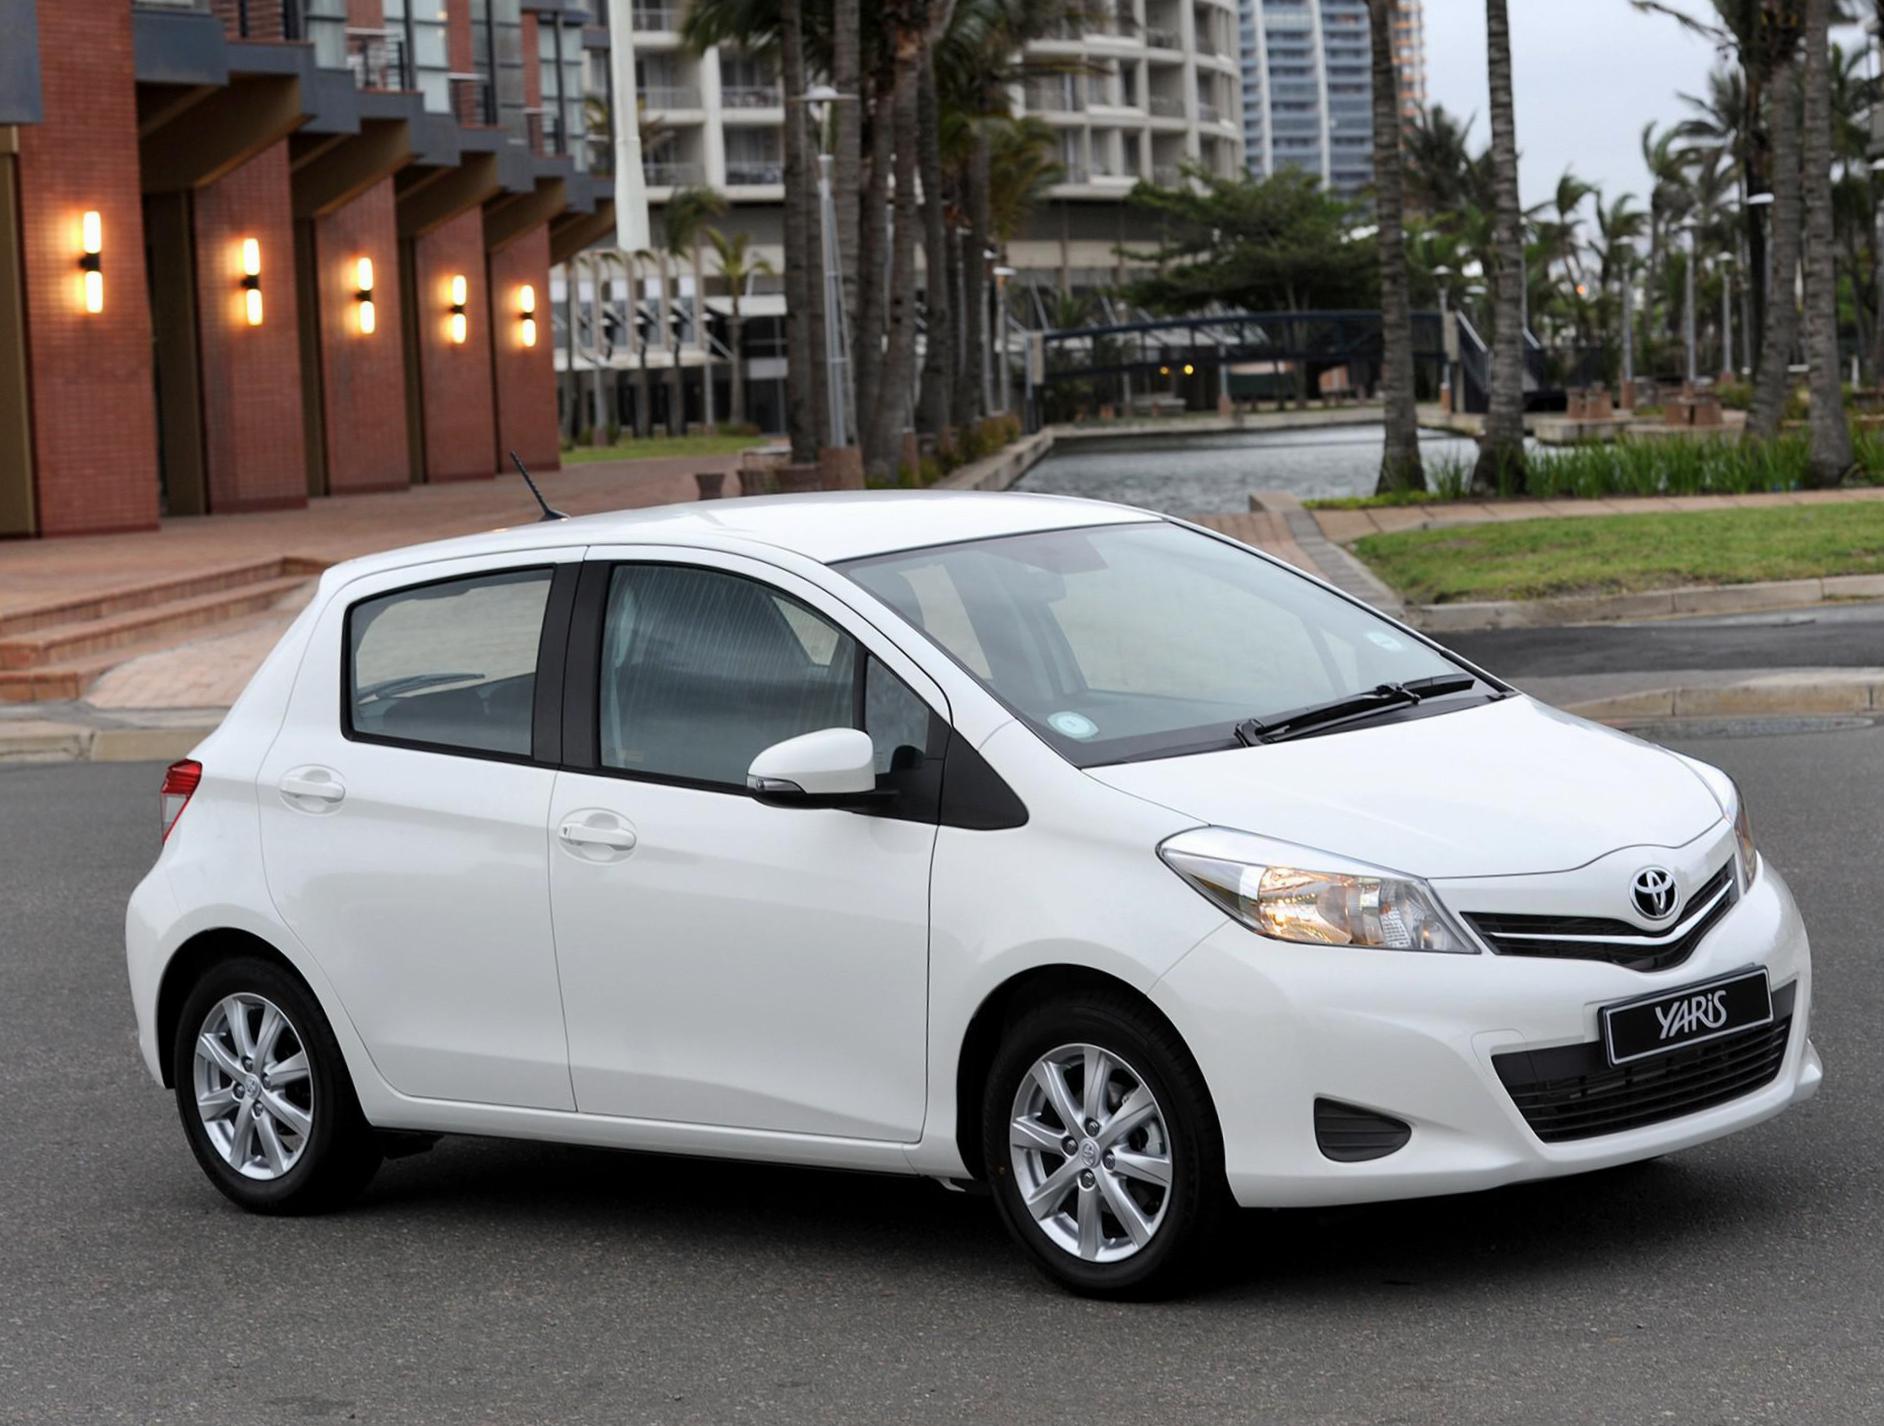 Toyota Yaris 5 doors approved hatchback